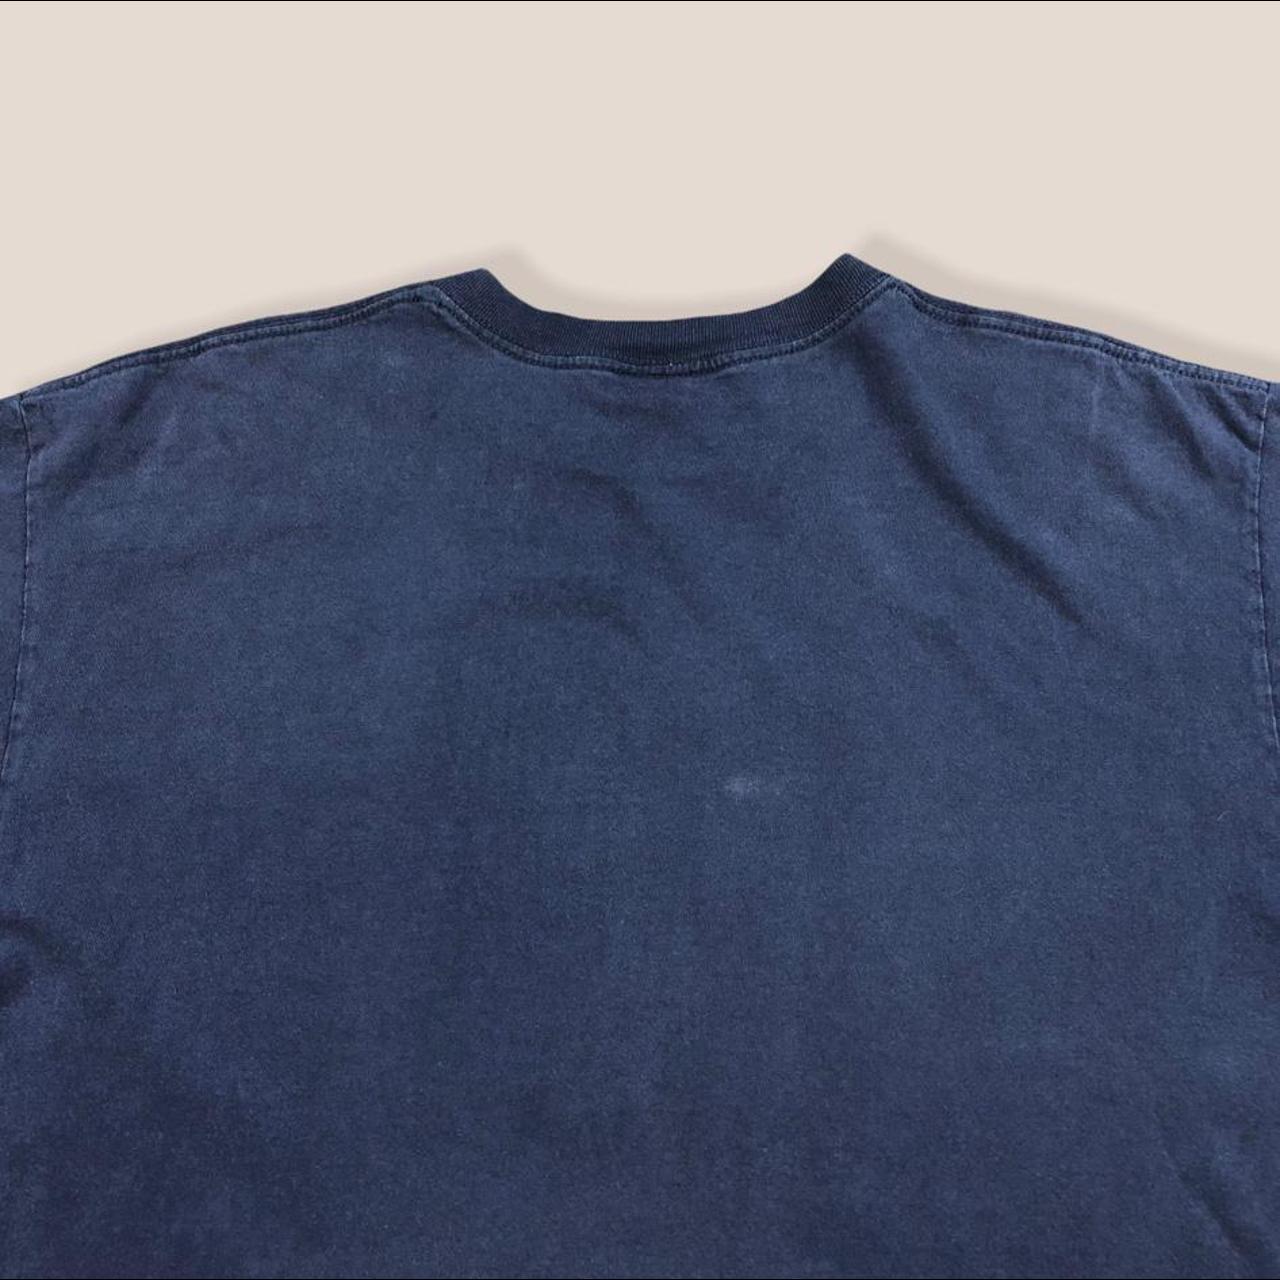 Product Image 4 - Vintage 2000’s y2k faded blue